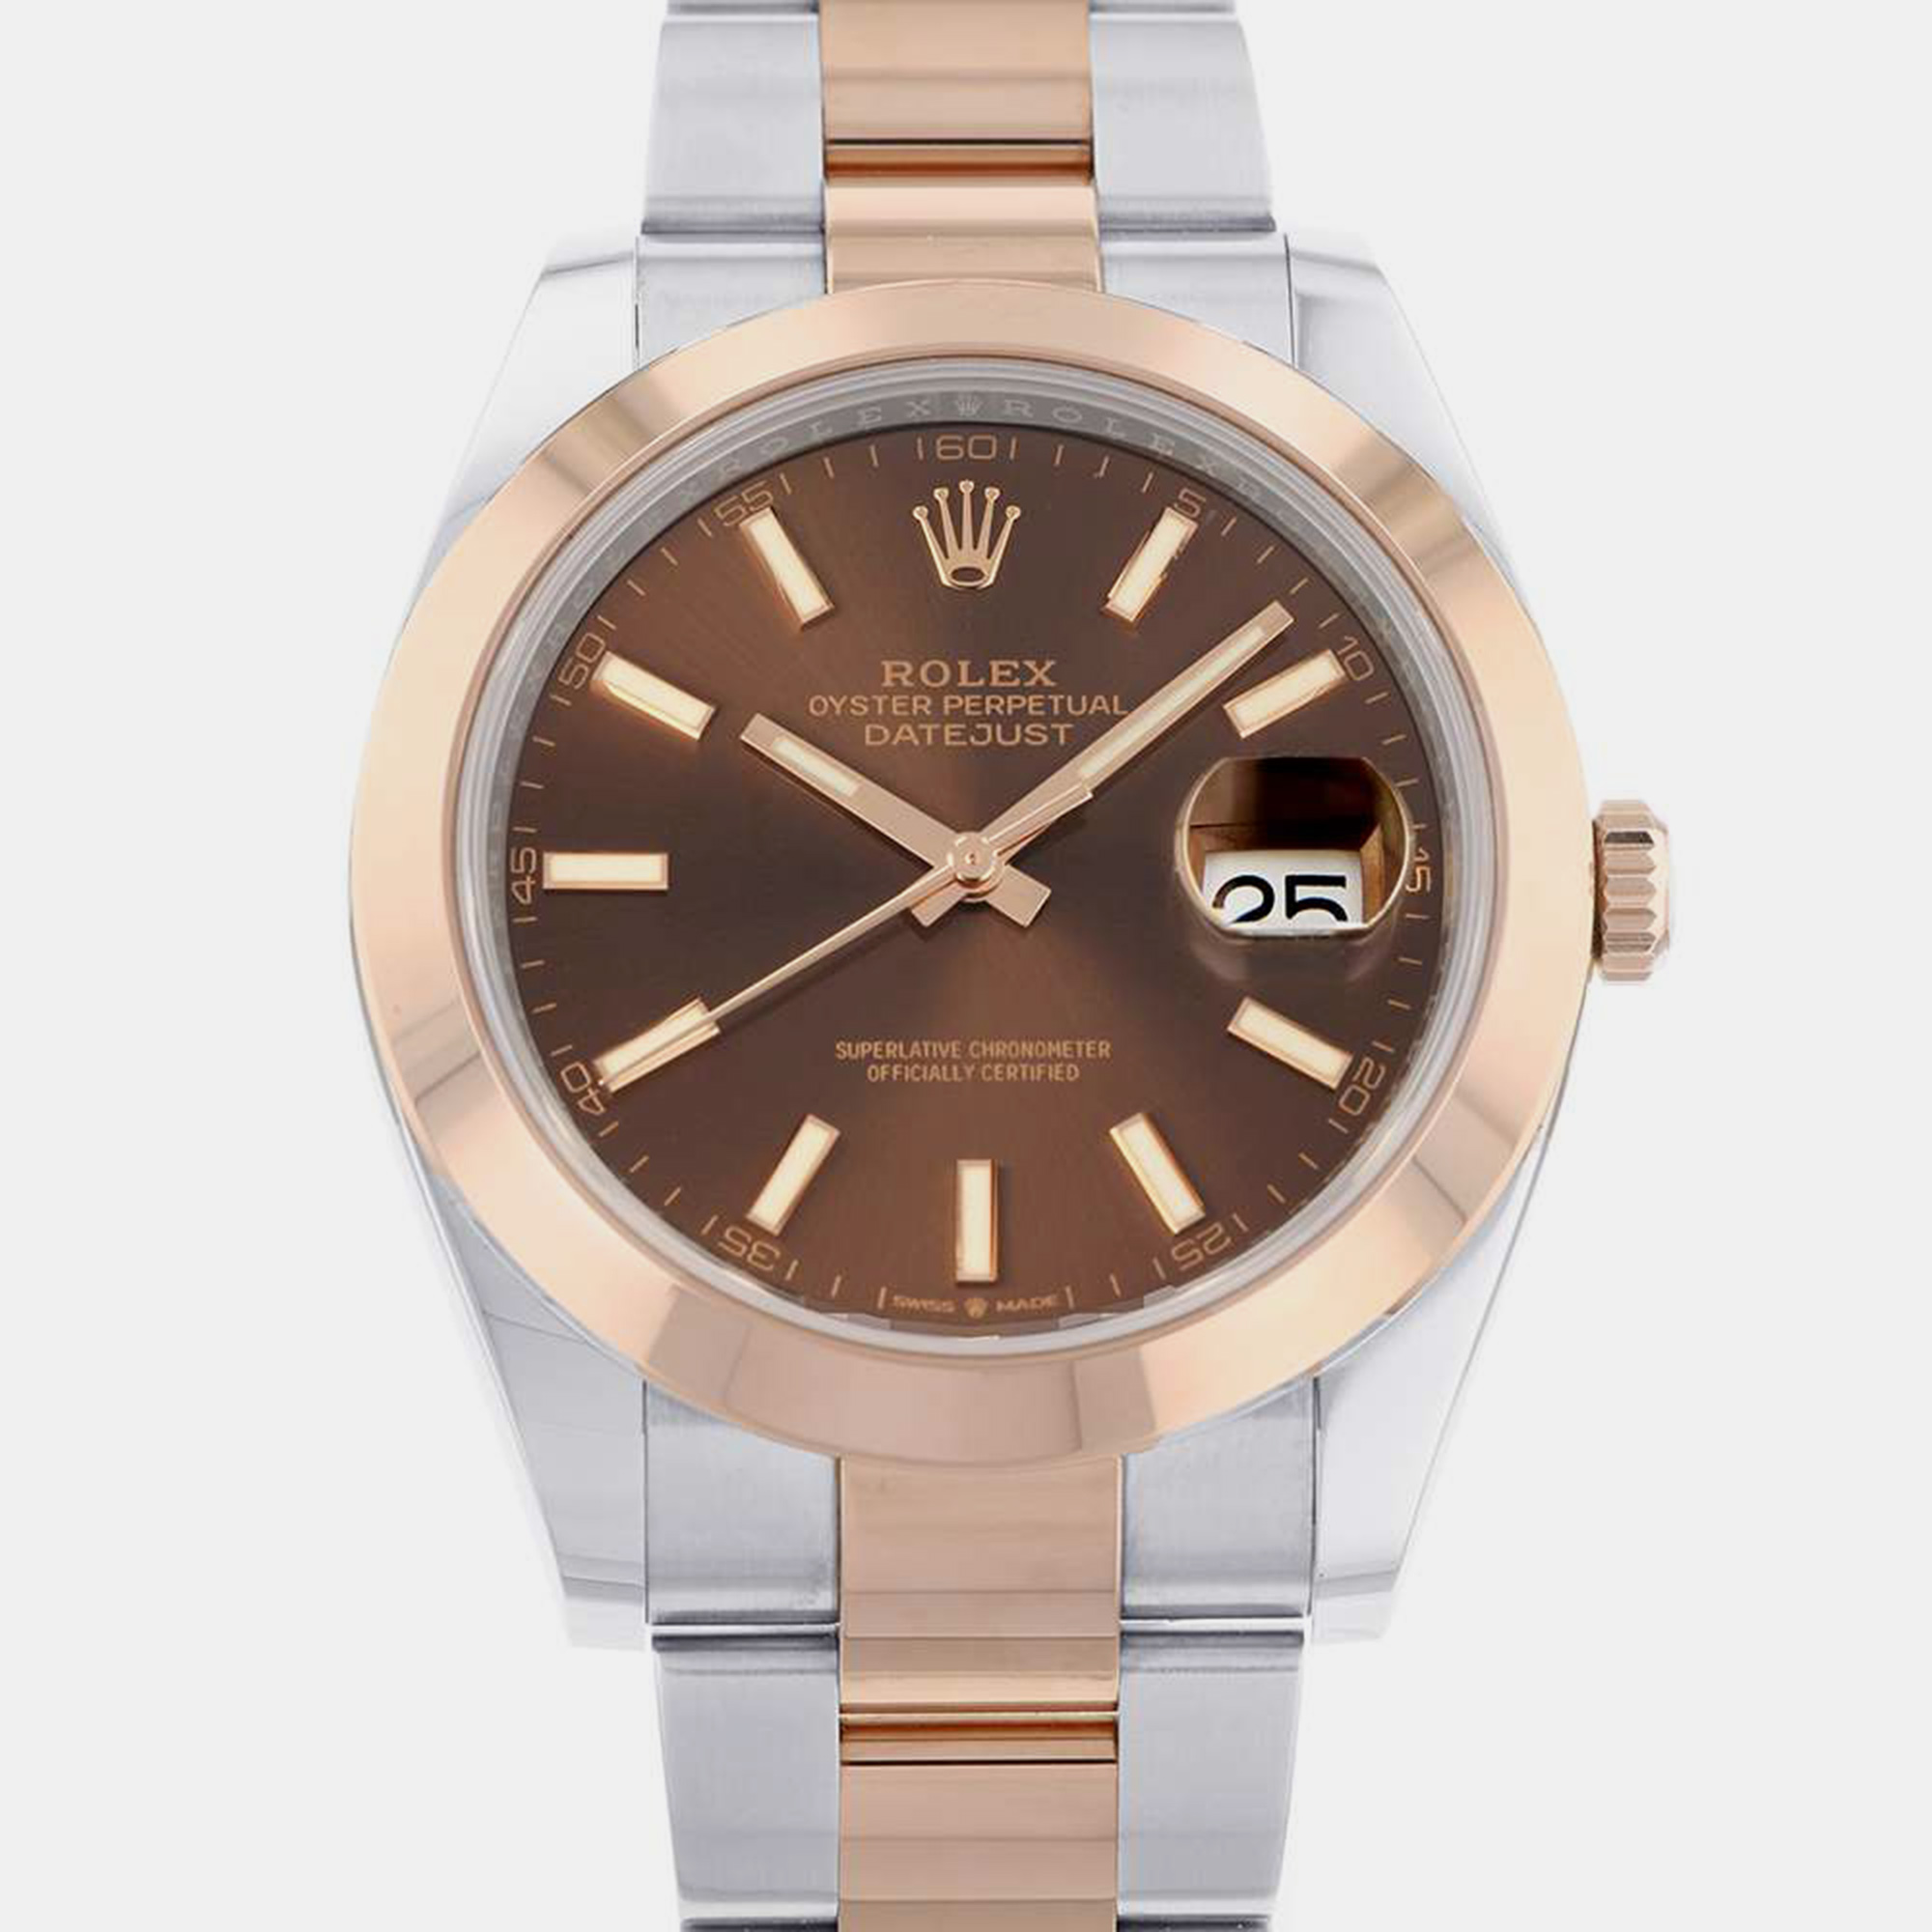 Rolex brown 18k rose gold stainless steel datejust automatic men's wristwatch 41 mm